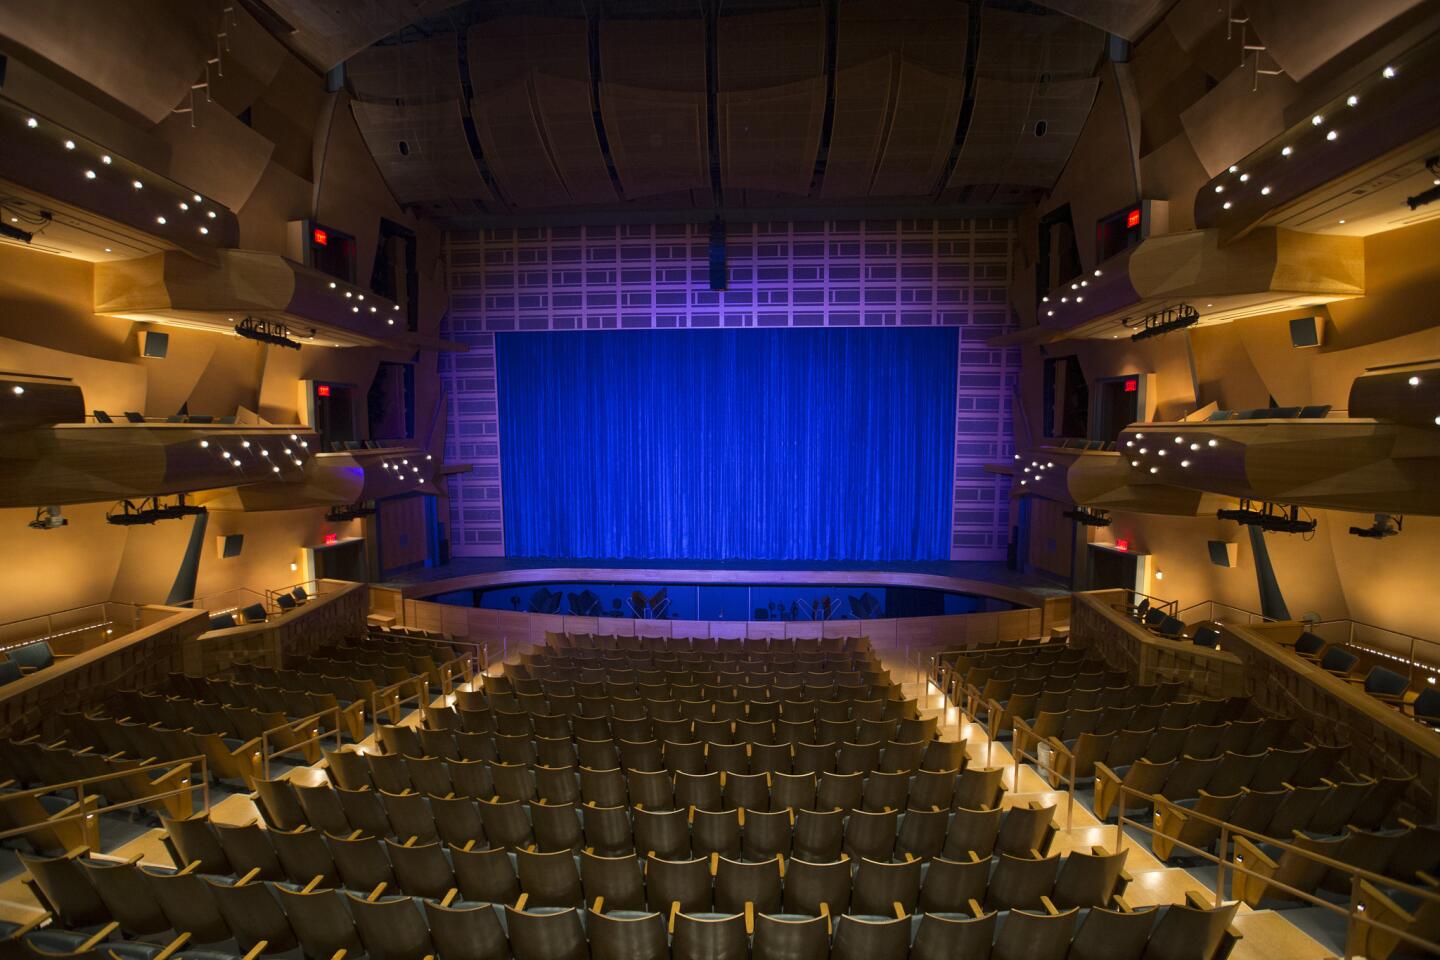 The Musco Center for the Arts